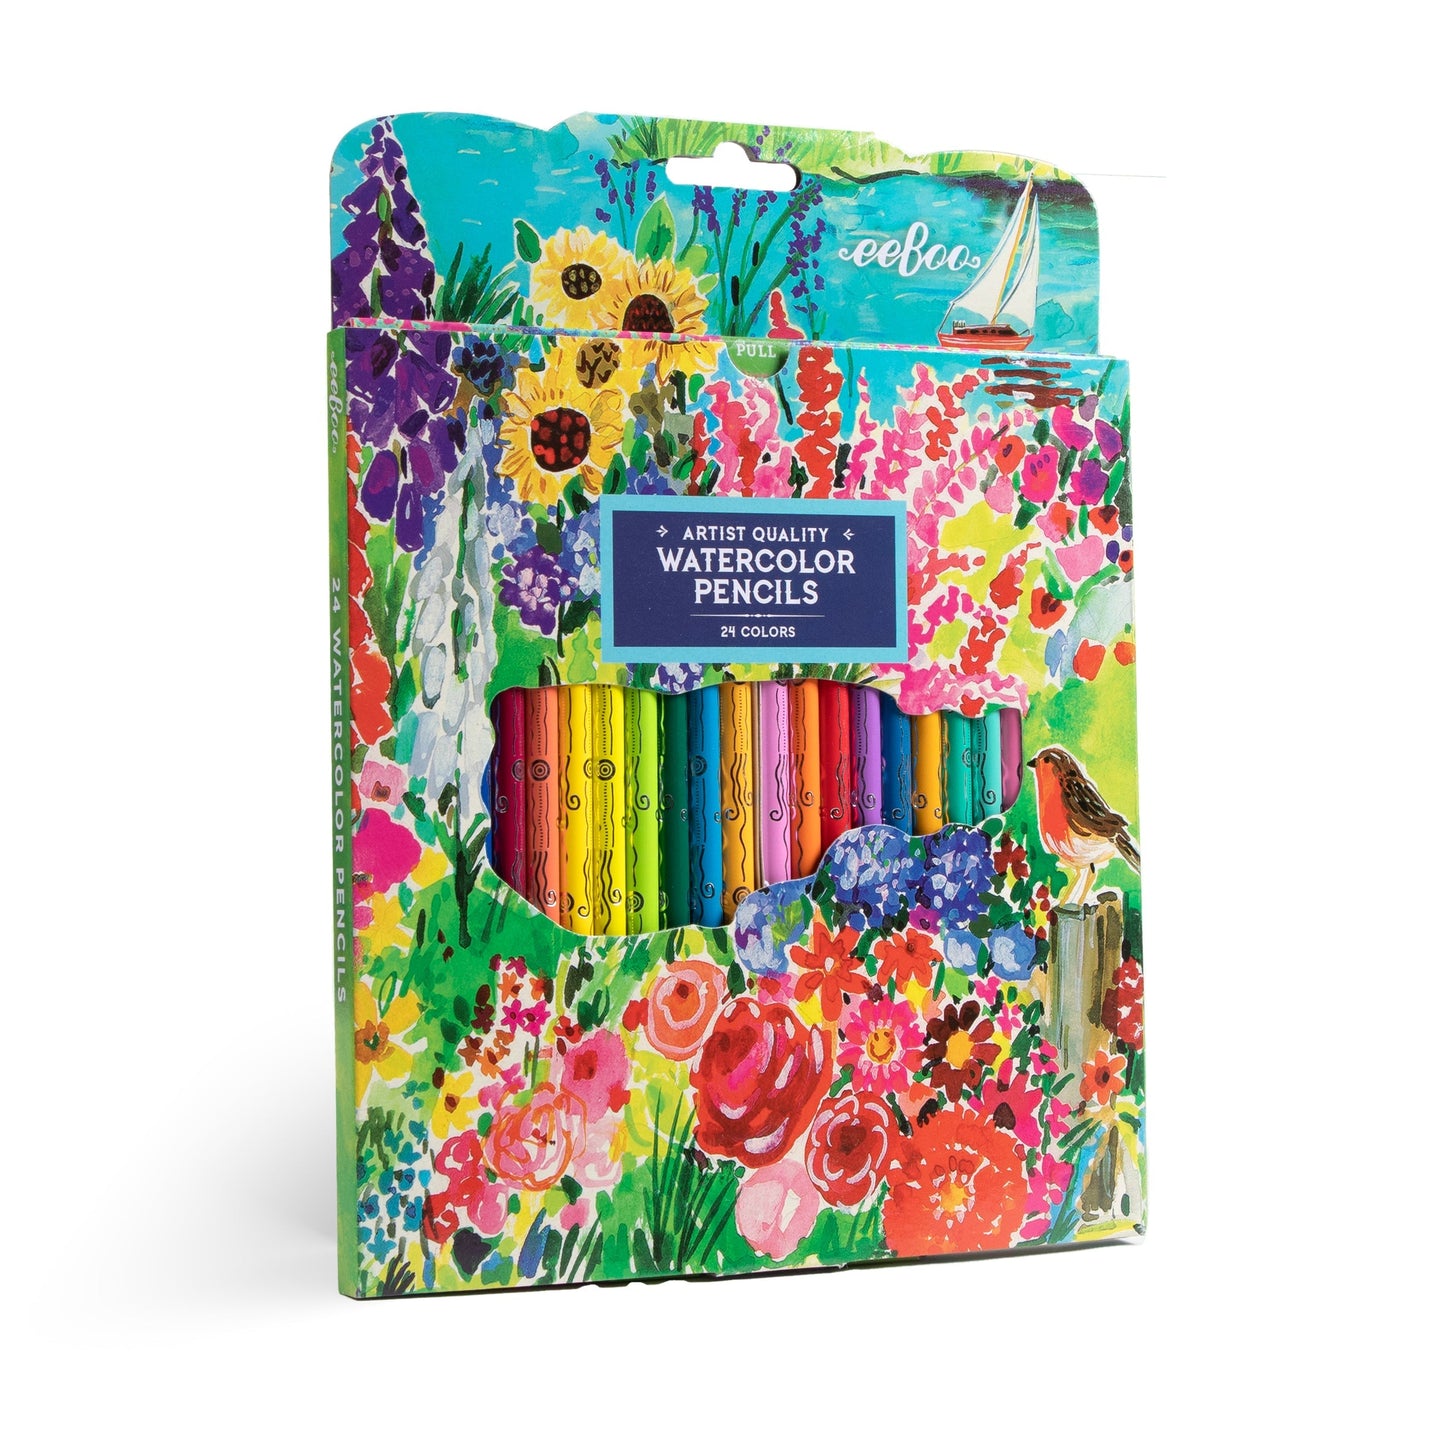  Seaside Garden 24 Watercolor Pencils | Unique Great Gifts for Kids & Adults 